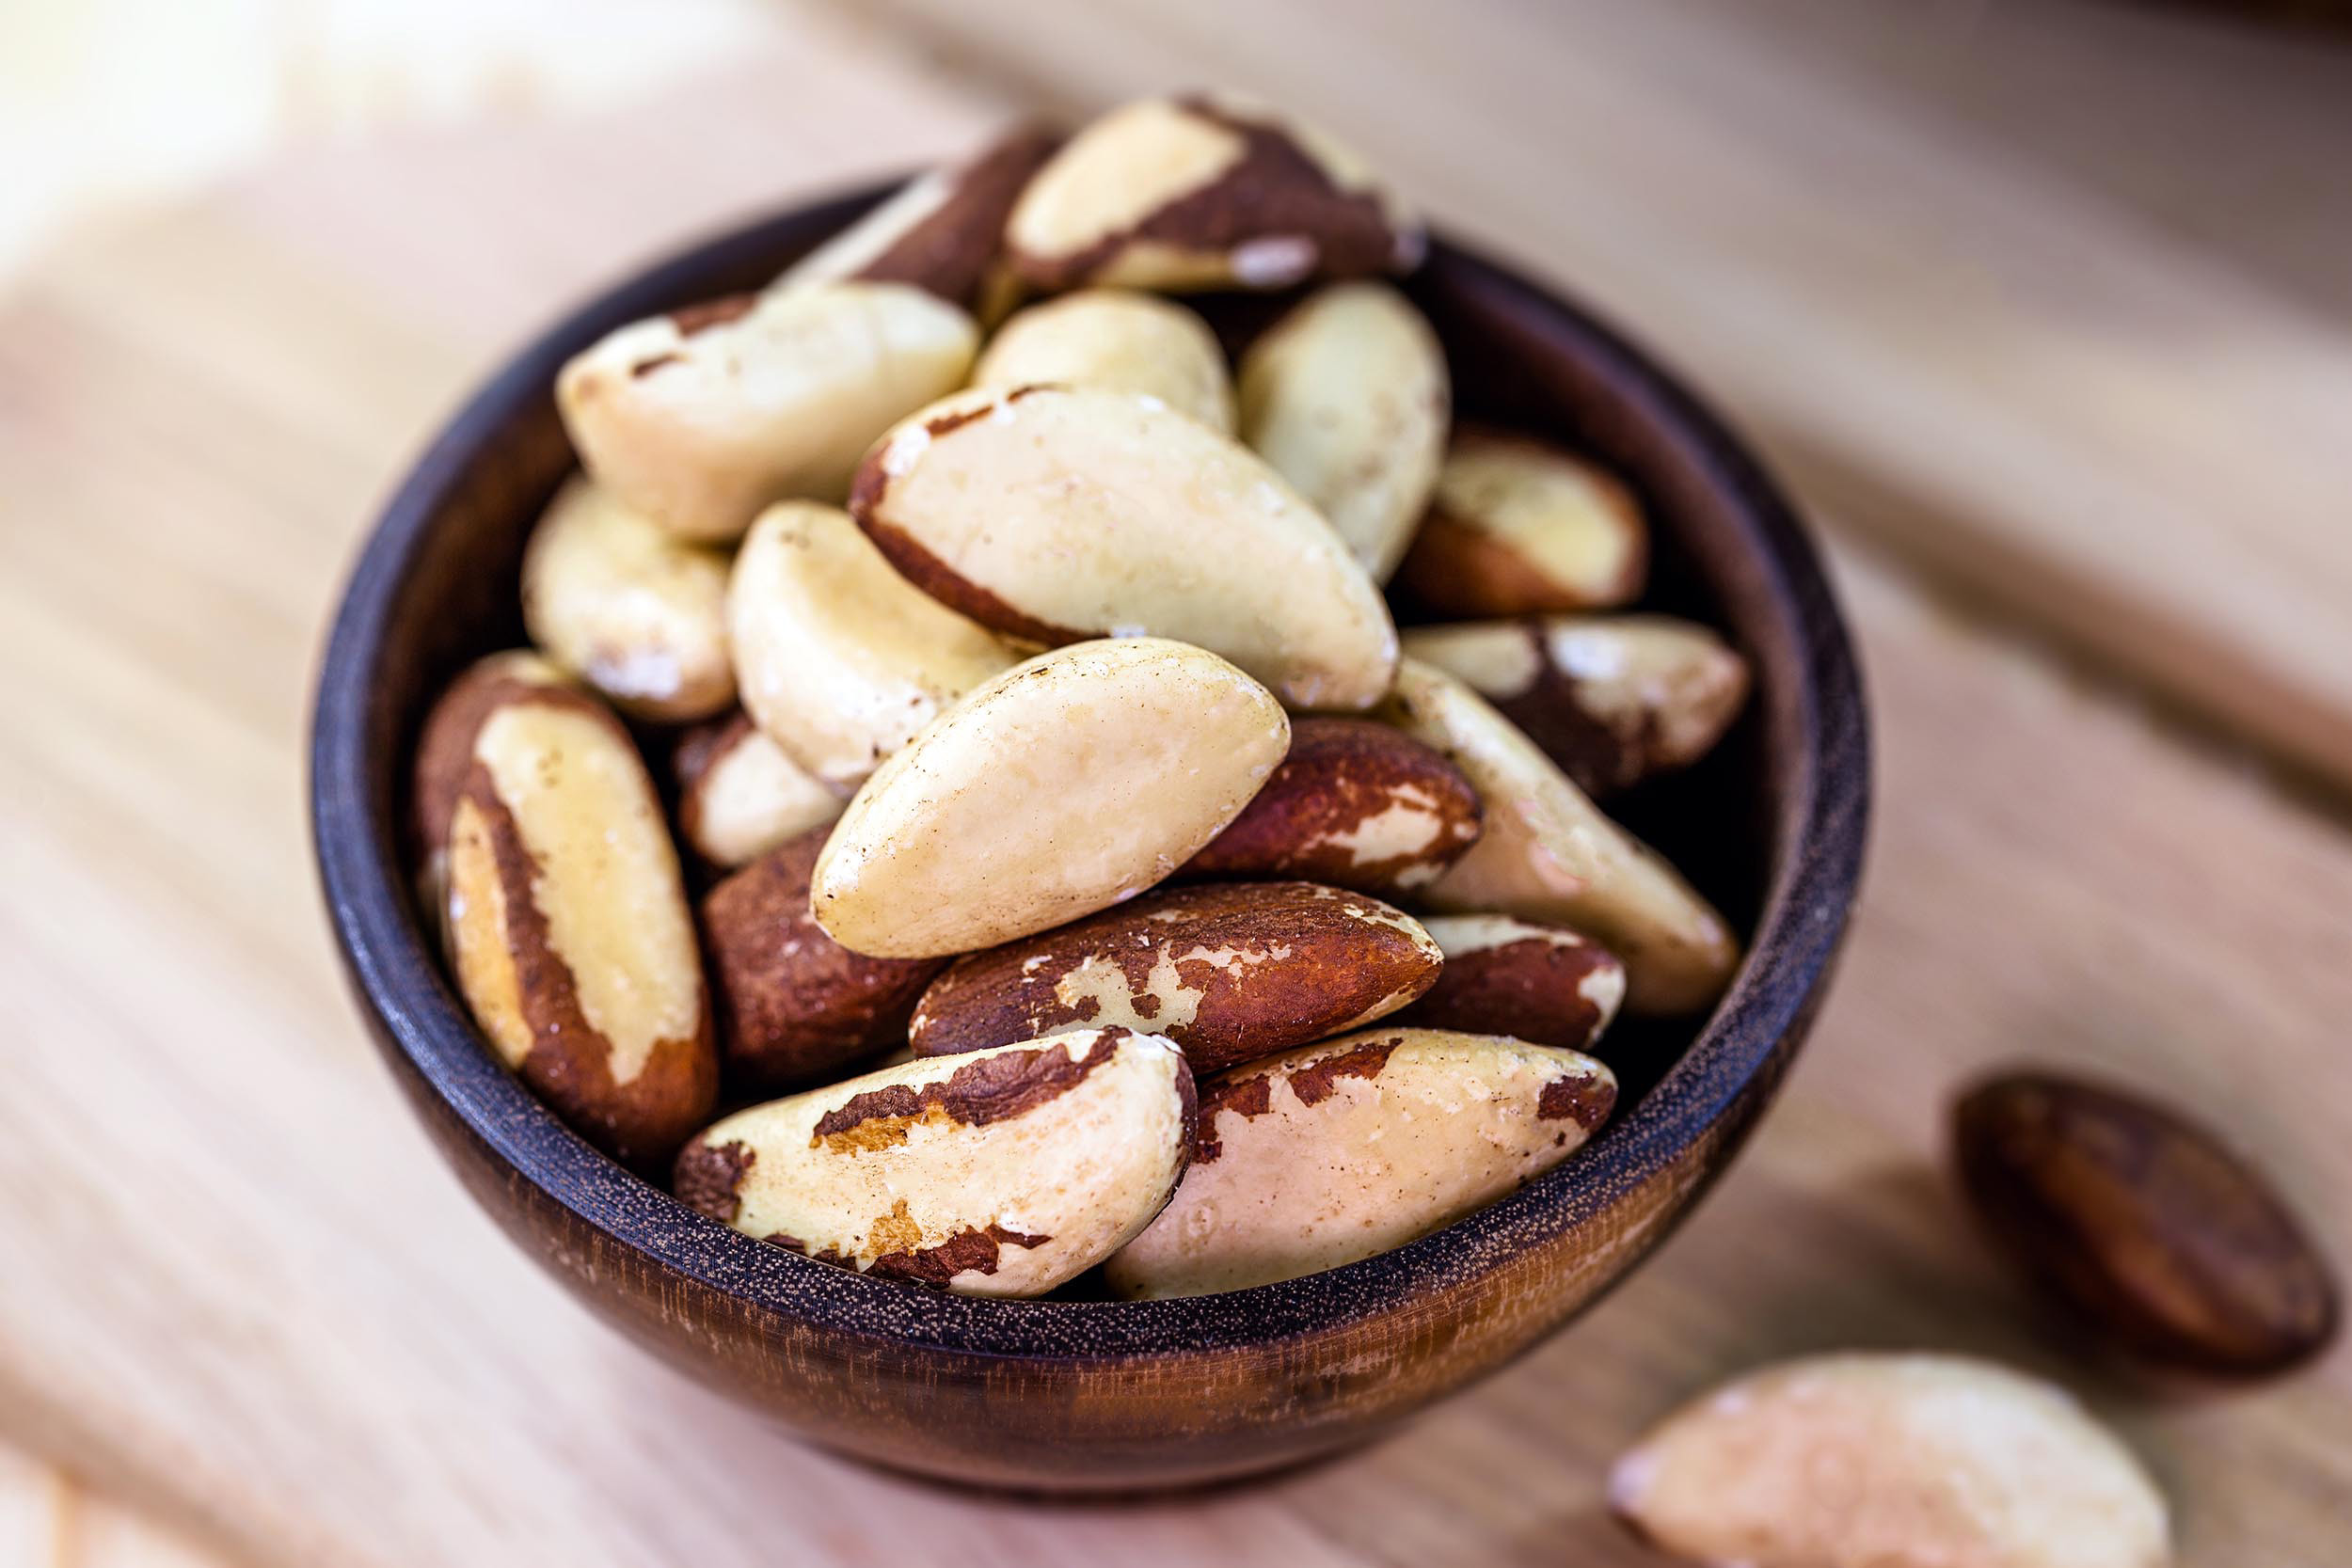 Eating just 2 of these nuts a day can help regulate metabolism and aid ...